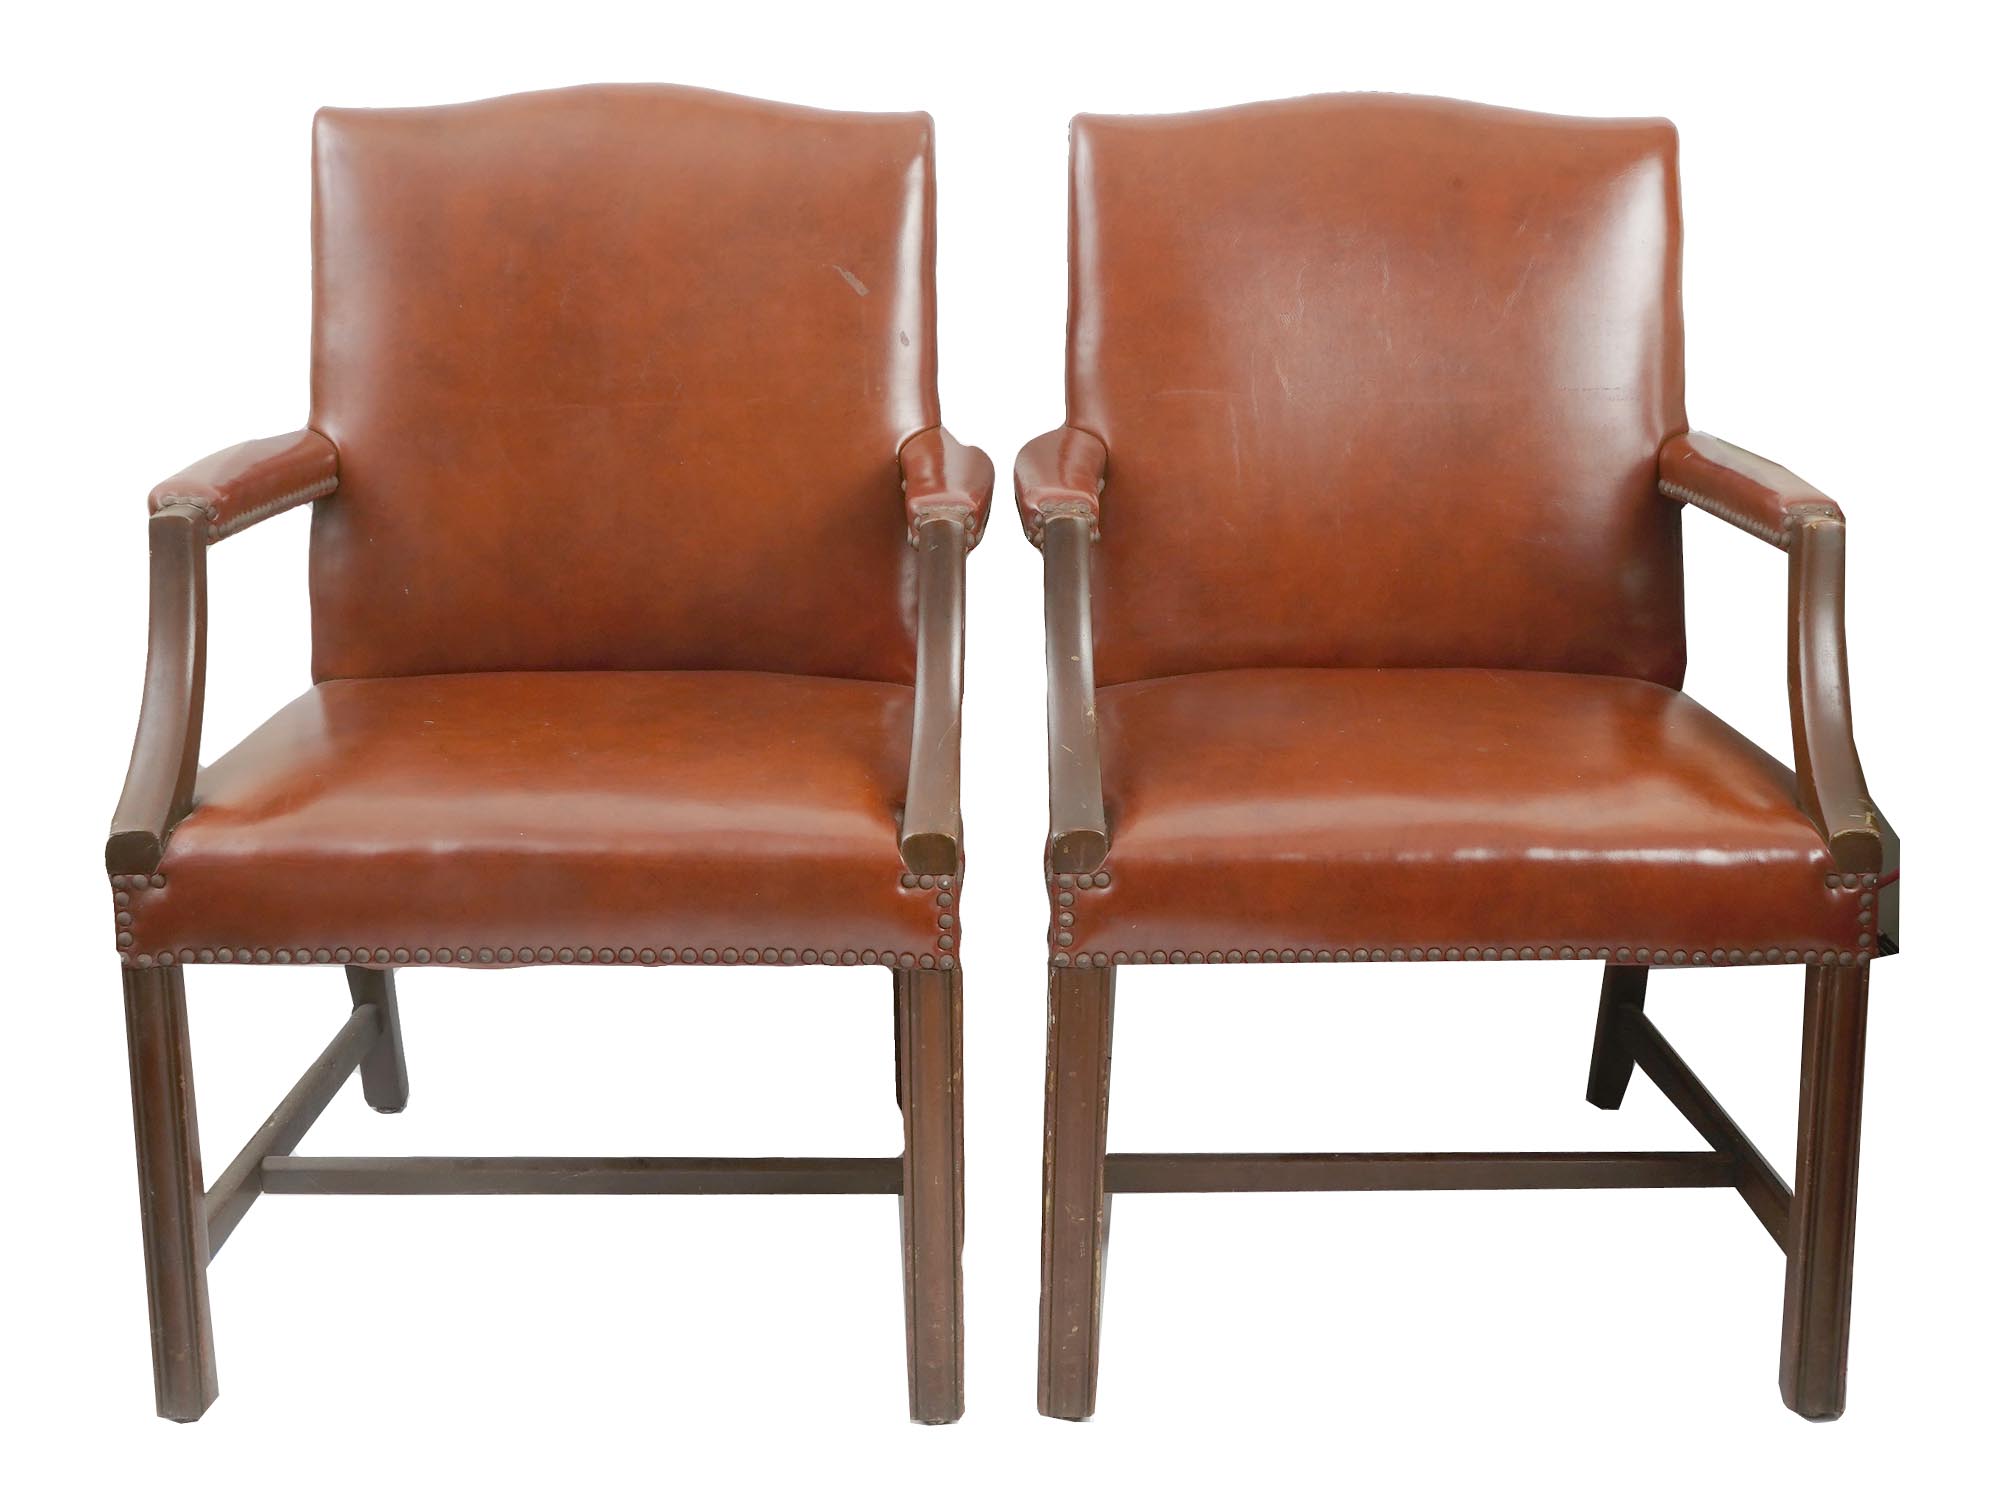 PAIR OF VINTAGE WOODEN ARMCHAIRS IN LEATHER PIC-0